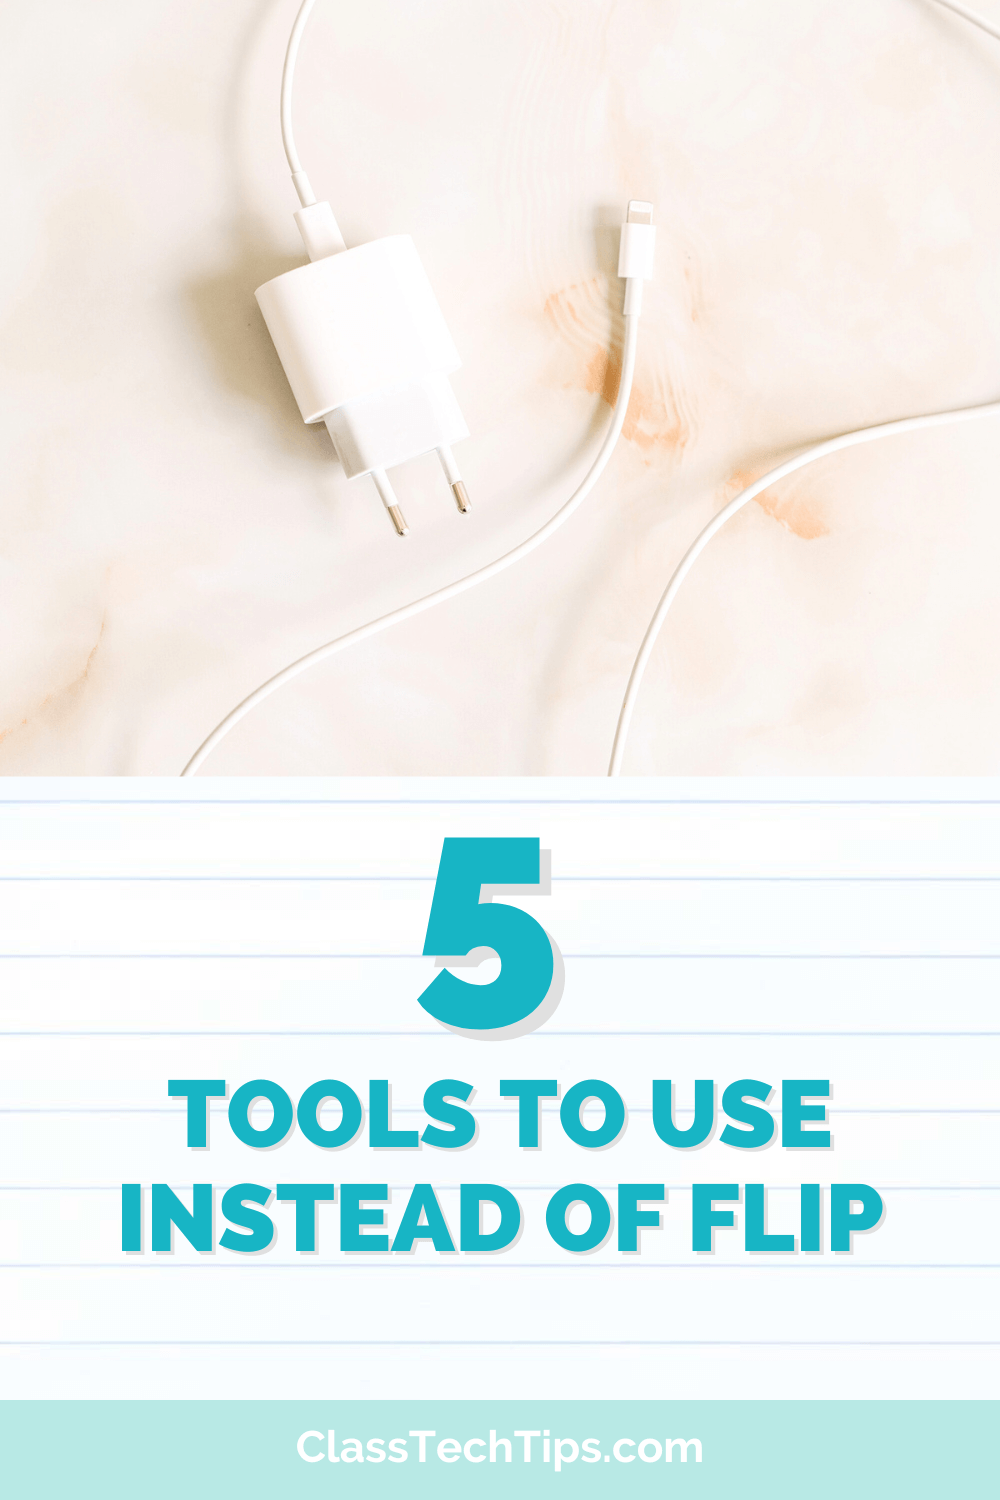 Five innovative tools to consider instead of Flip for empowering students. Image shows a plug and the Class Tech Tips logo.